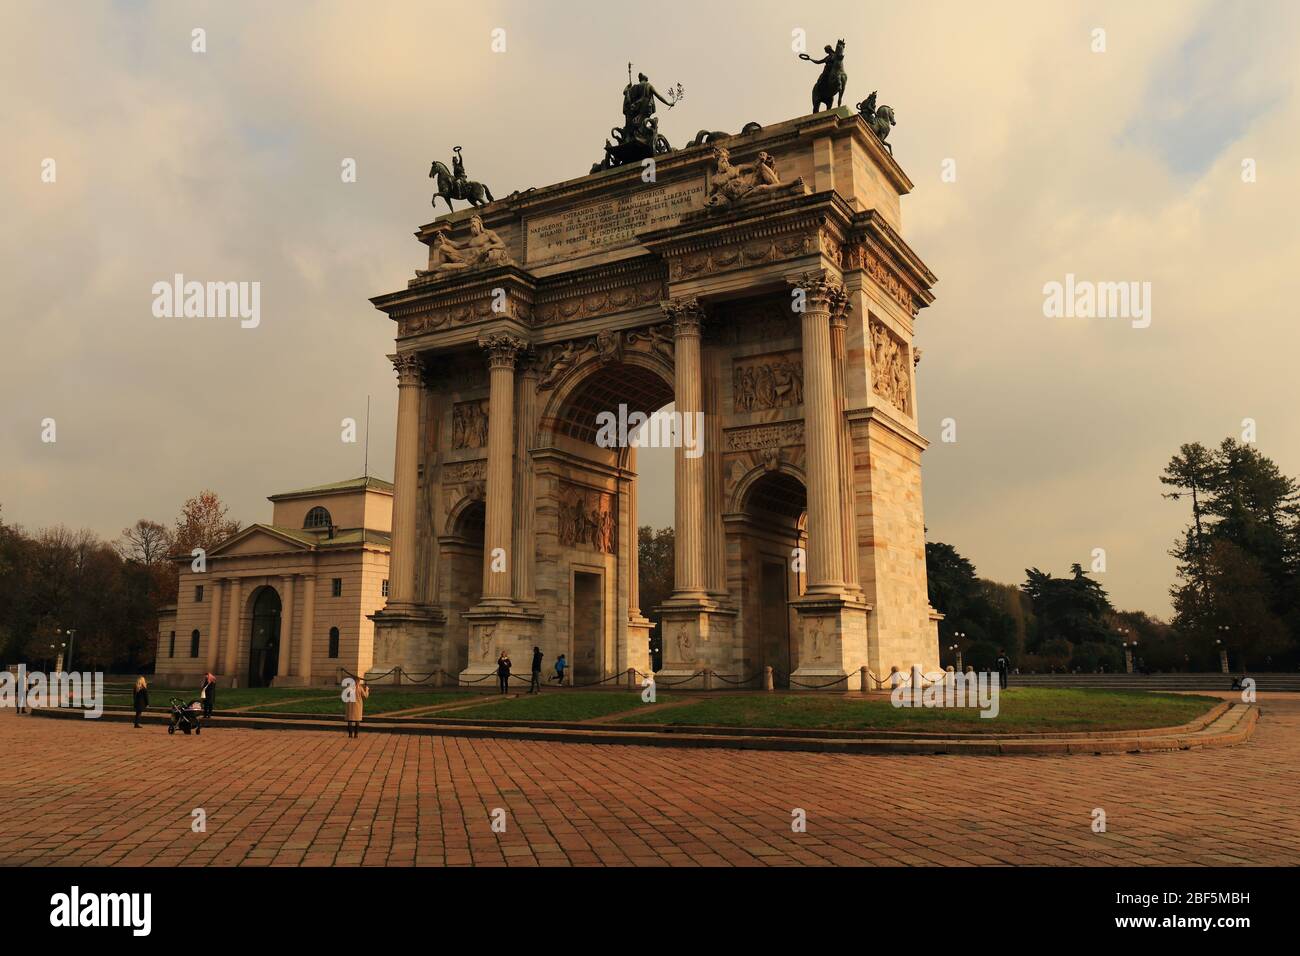 View of Piazza Sempione, with Arco della Pace, Milan, Italy. Stock Photo